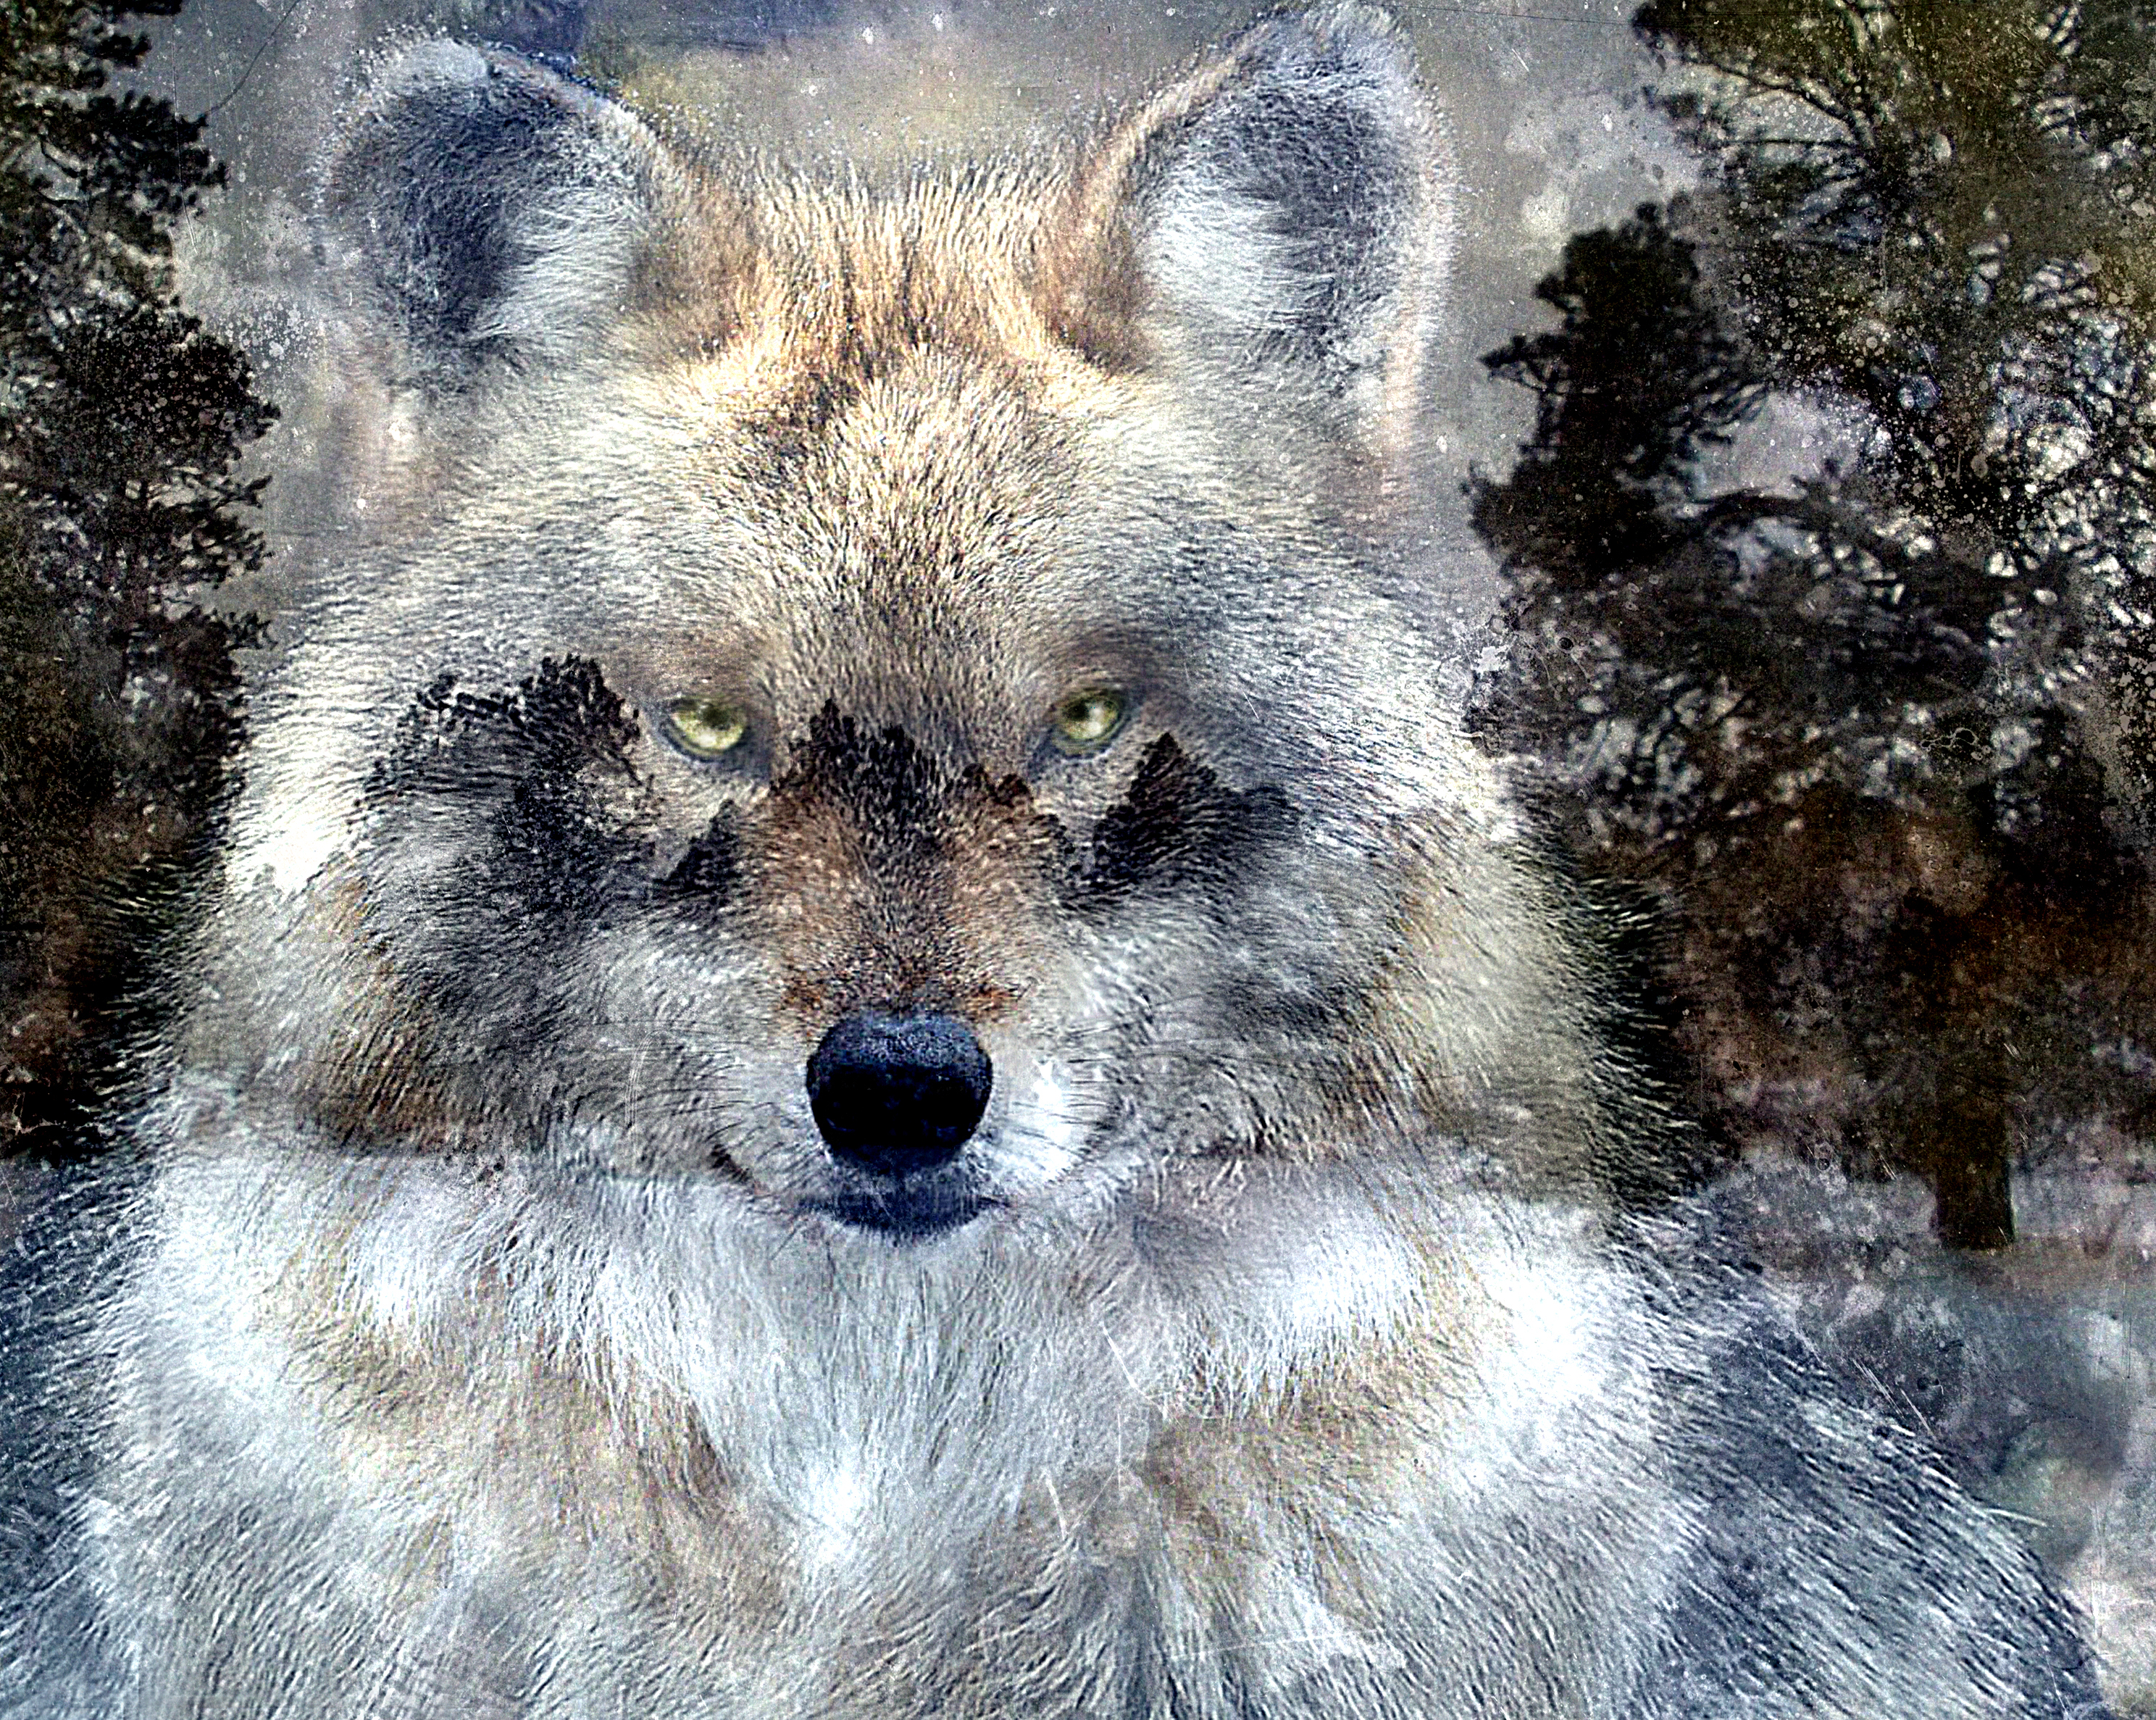 What motivates you to care about Mexican gray wolves?